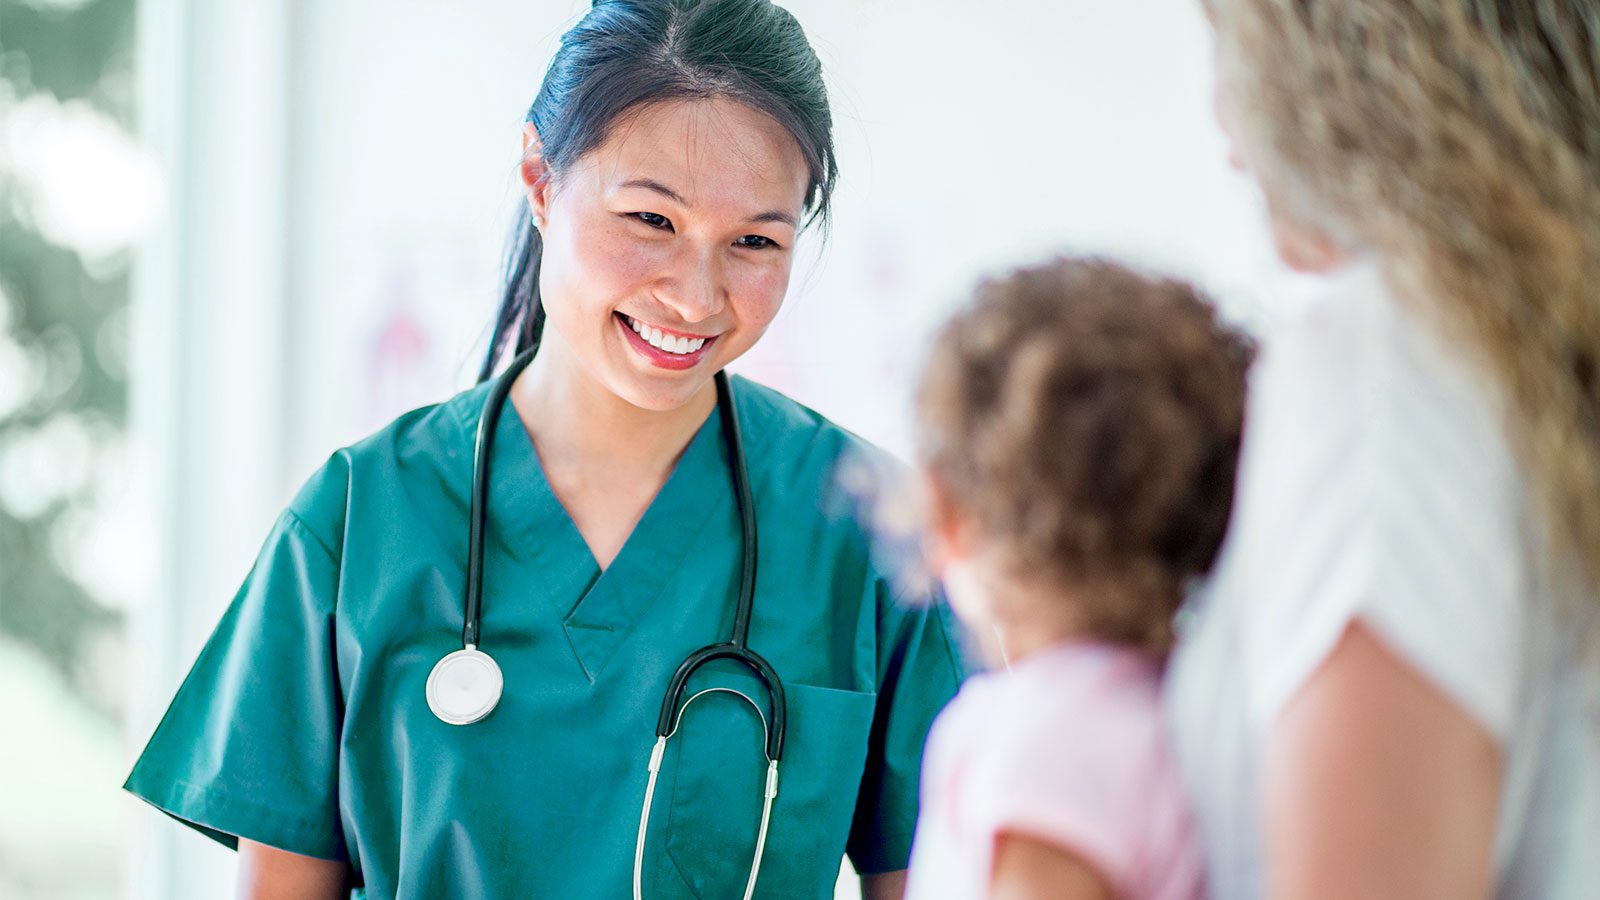 healthcare professional smiles down at young girl